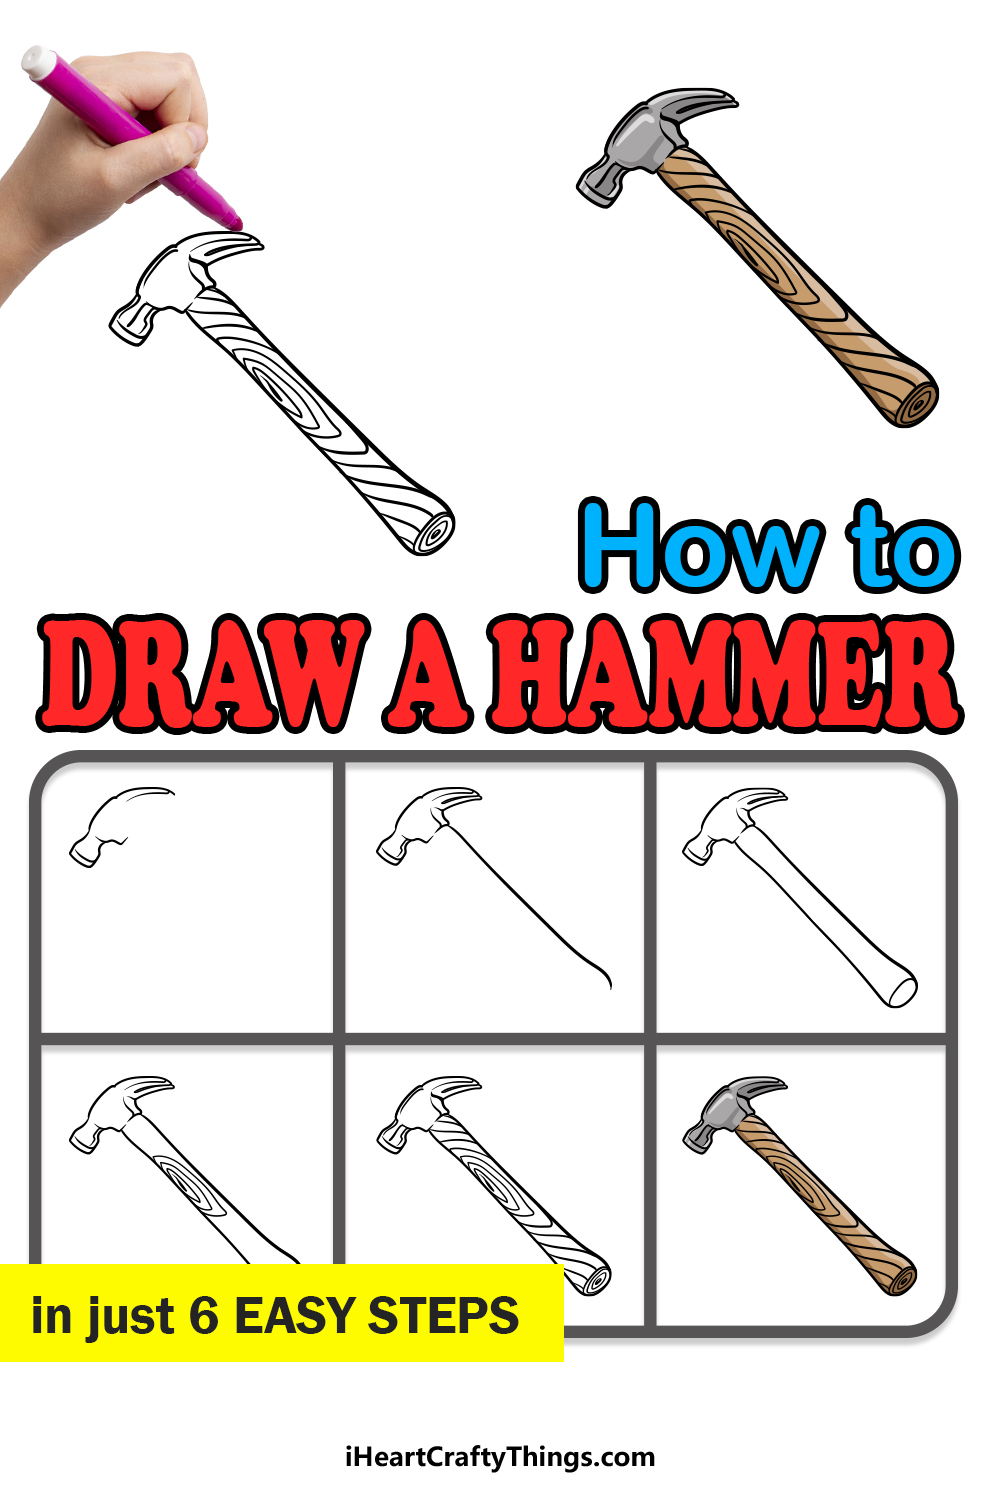 Hammer Drawing - How To Draw A Hammer Step By Step